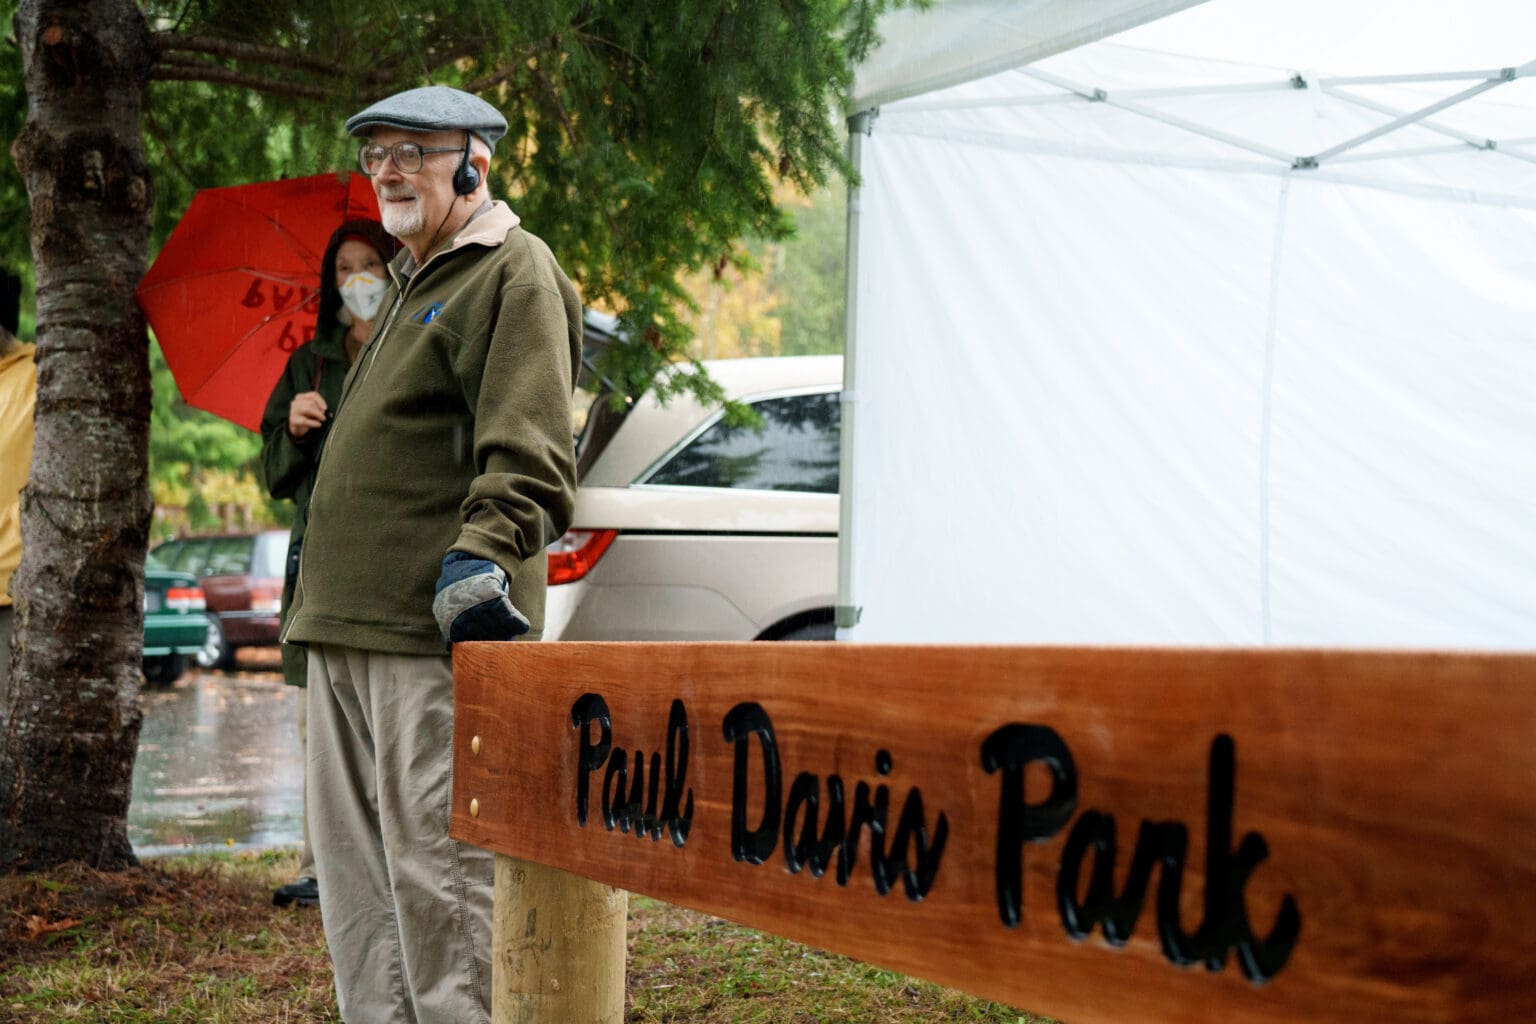 Paul Davis, 97, stands next to the sign for the newly named Paul Davis Park with headphones on next to a woman with a bright red umbrella.